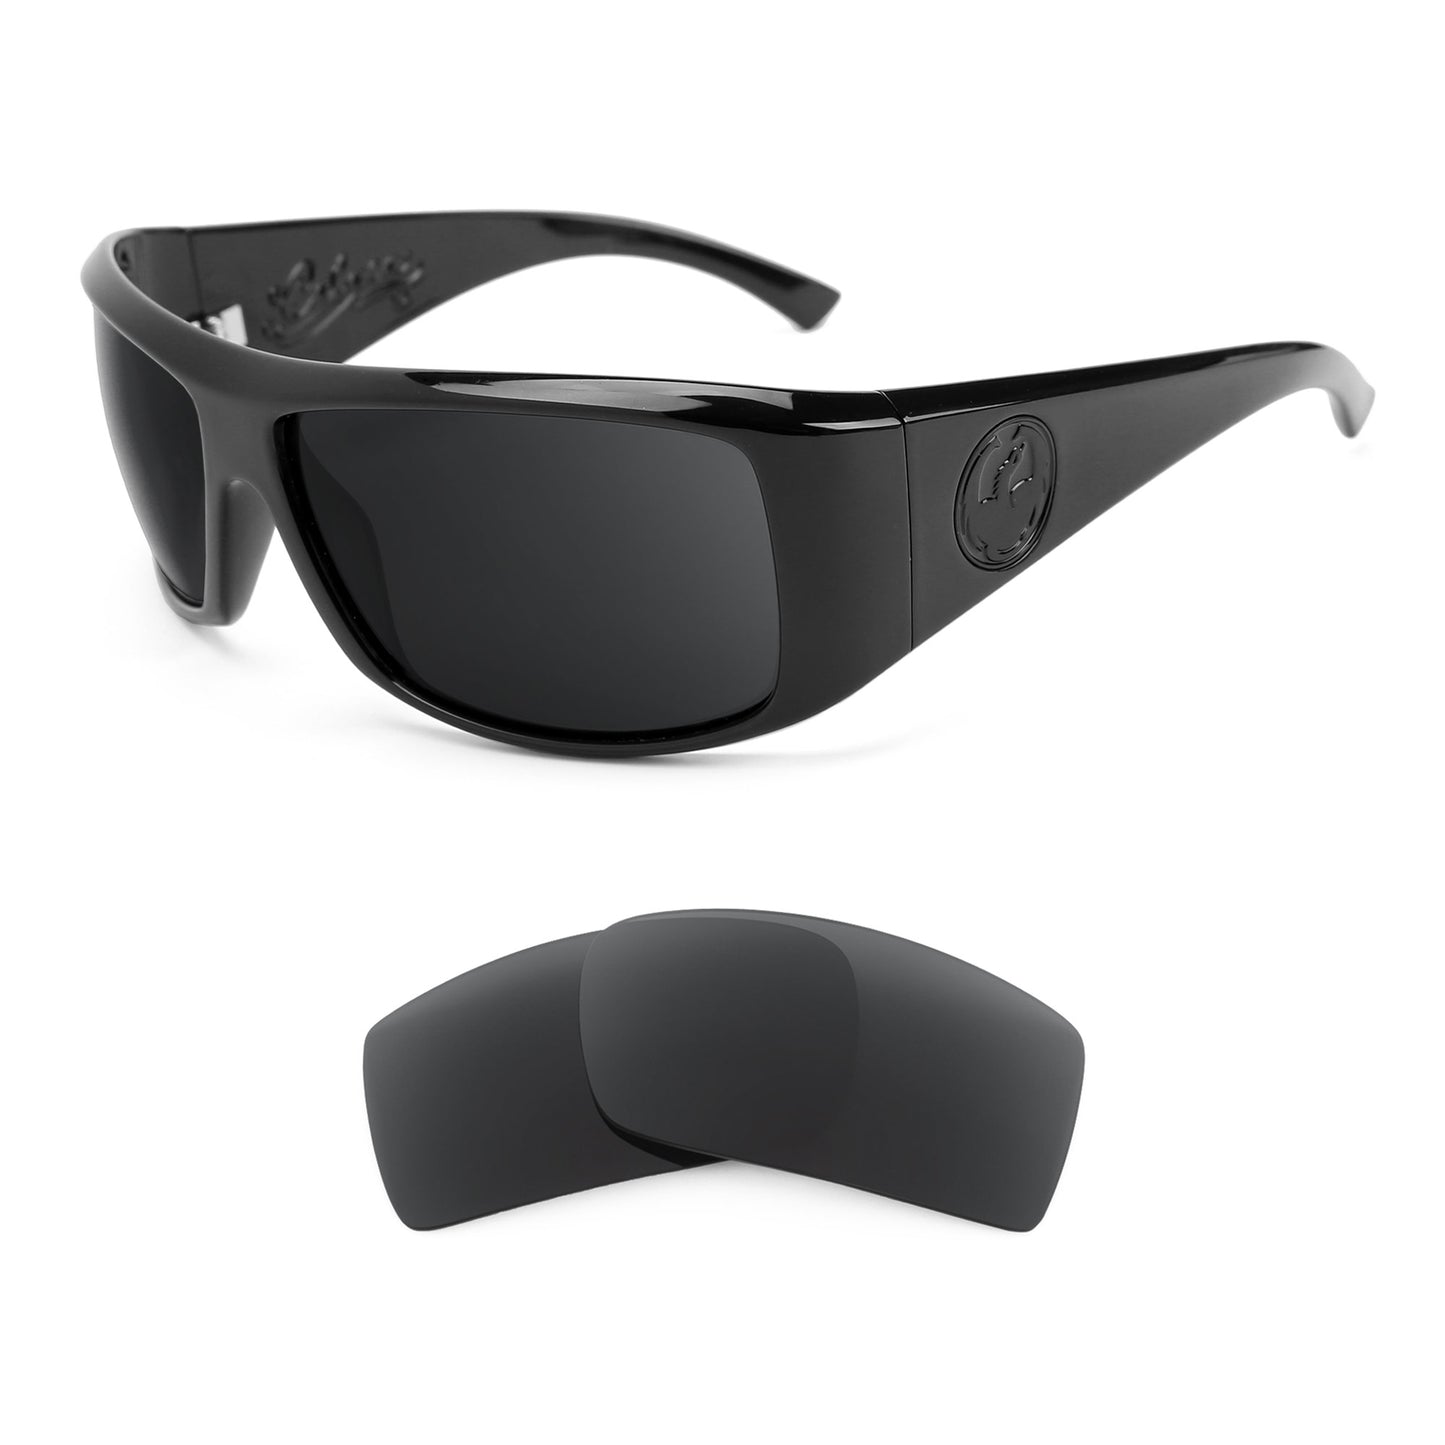 Dragon Calaca sunglasses with replacement lenses